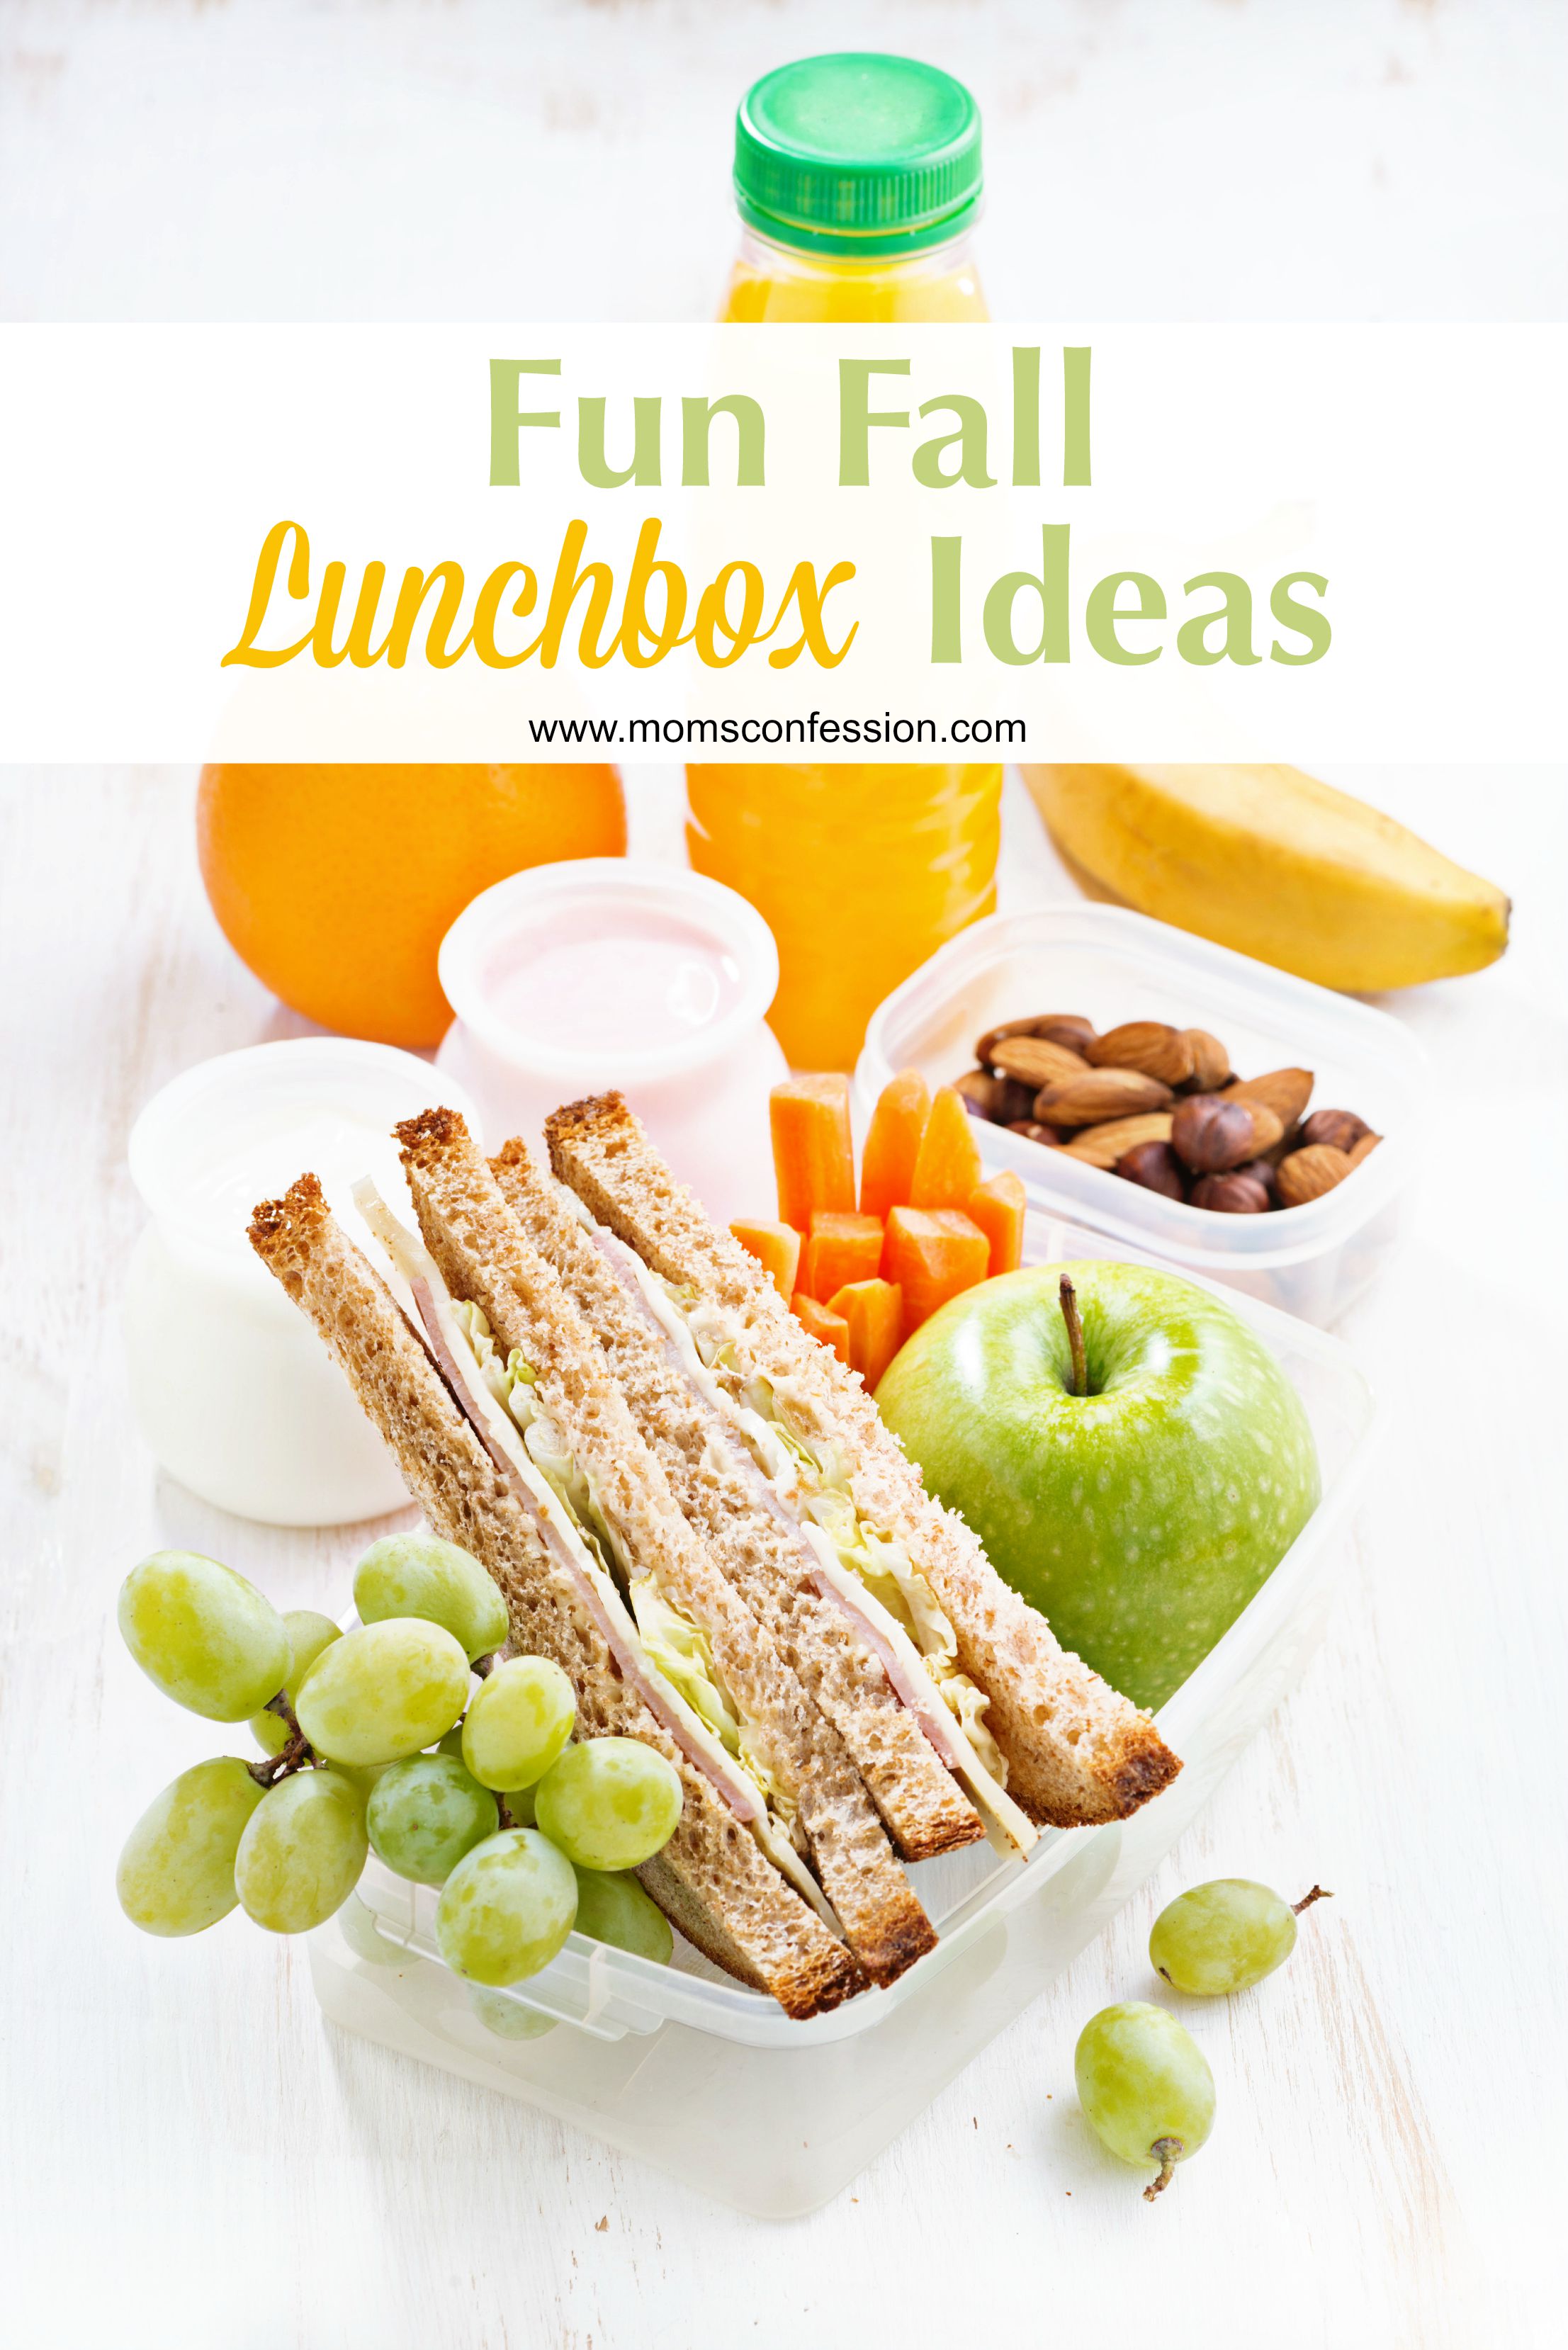 Lunchbox Ideas like our list of Fun Fall Lunchbox Ideas make it easy to pack lunch for your kids each day! Grab our tips and make your kids lunch they love!